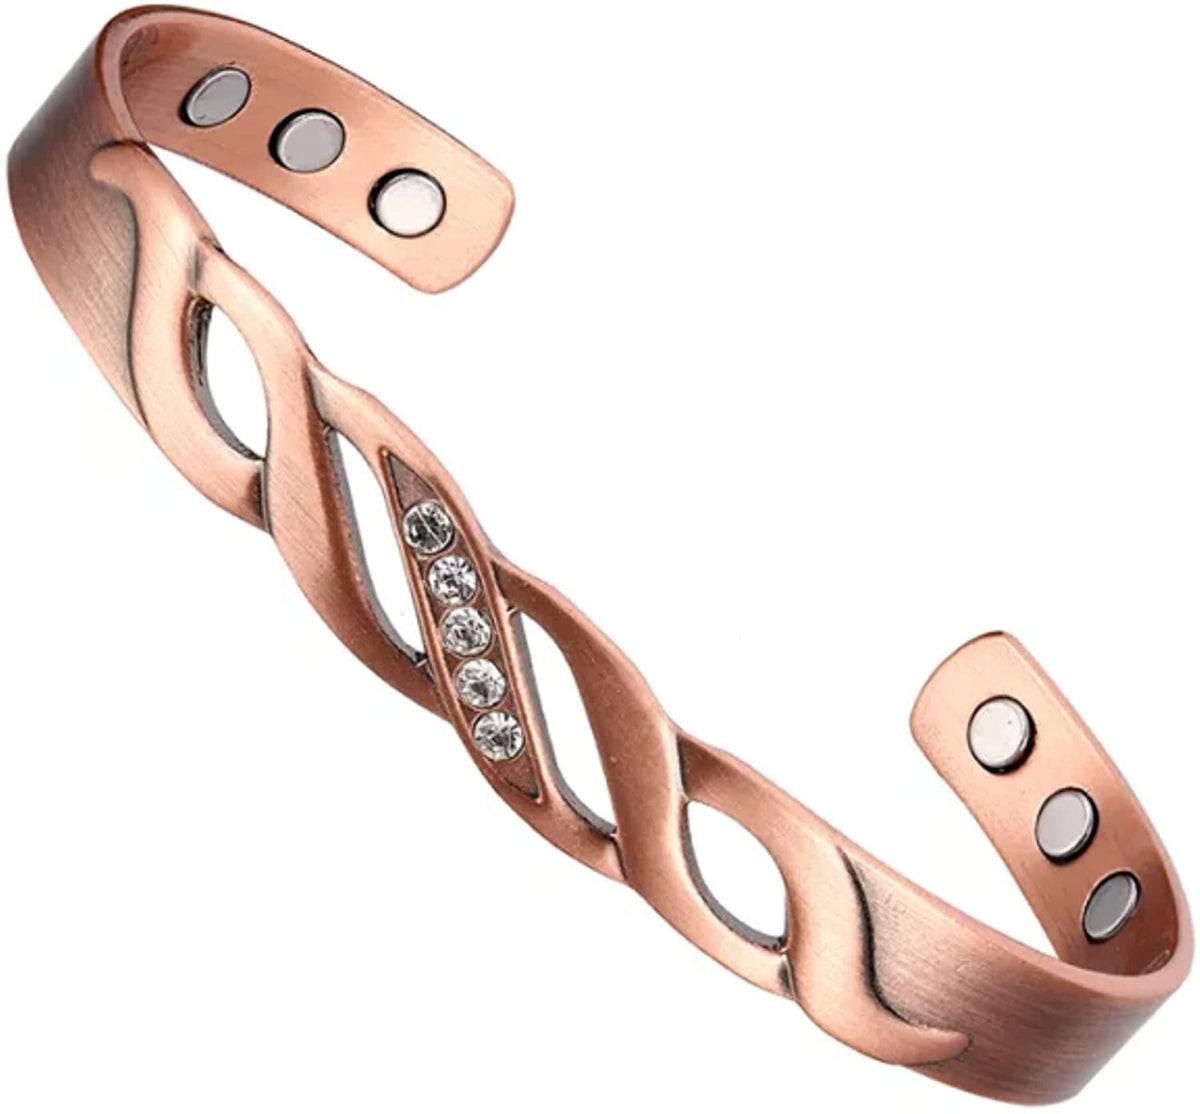 My Copper Crystals Design Pure Copper Magnetic Therapy Bracelet for Women